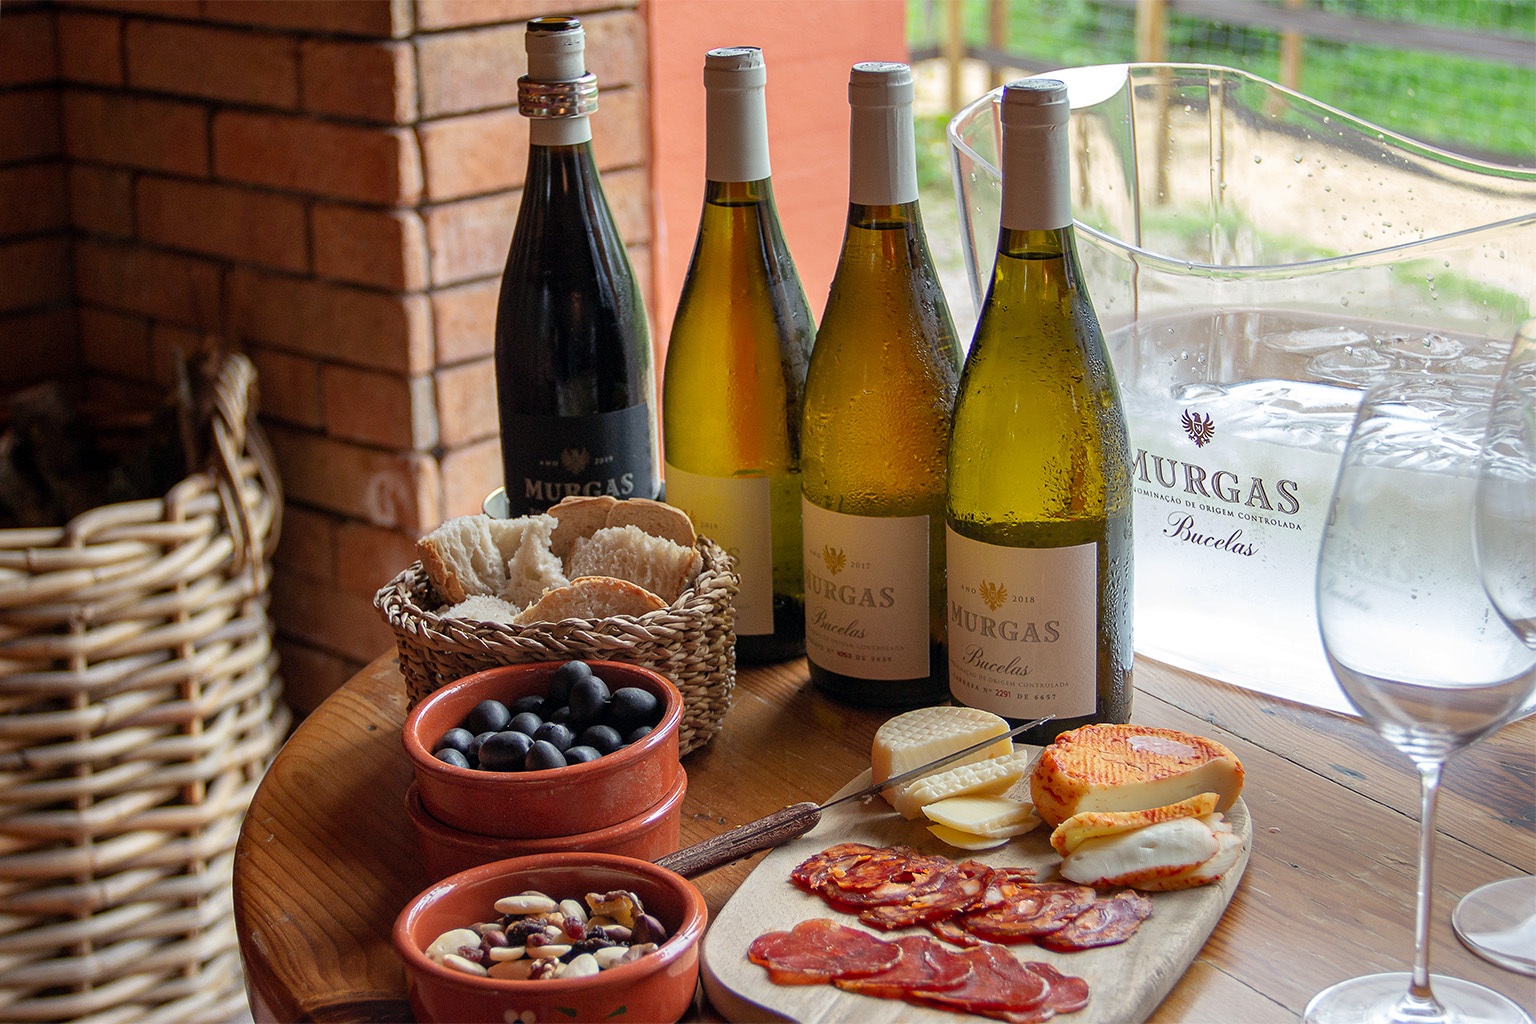 Murgas Wines: Horse riding and wine tasting in Lisbon